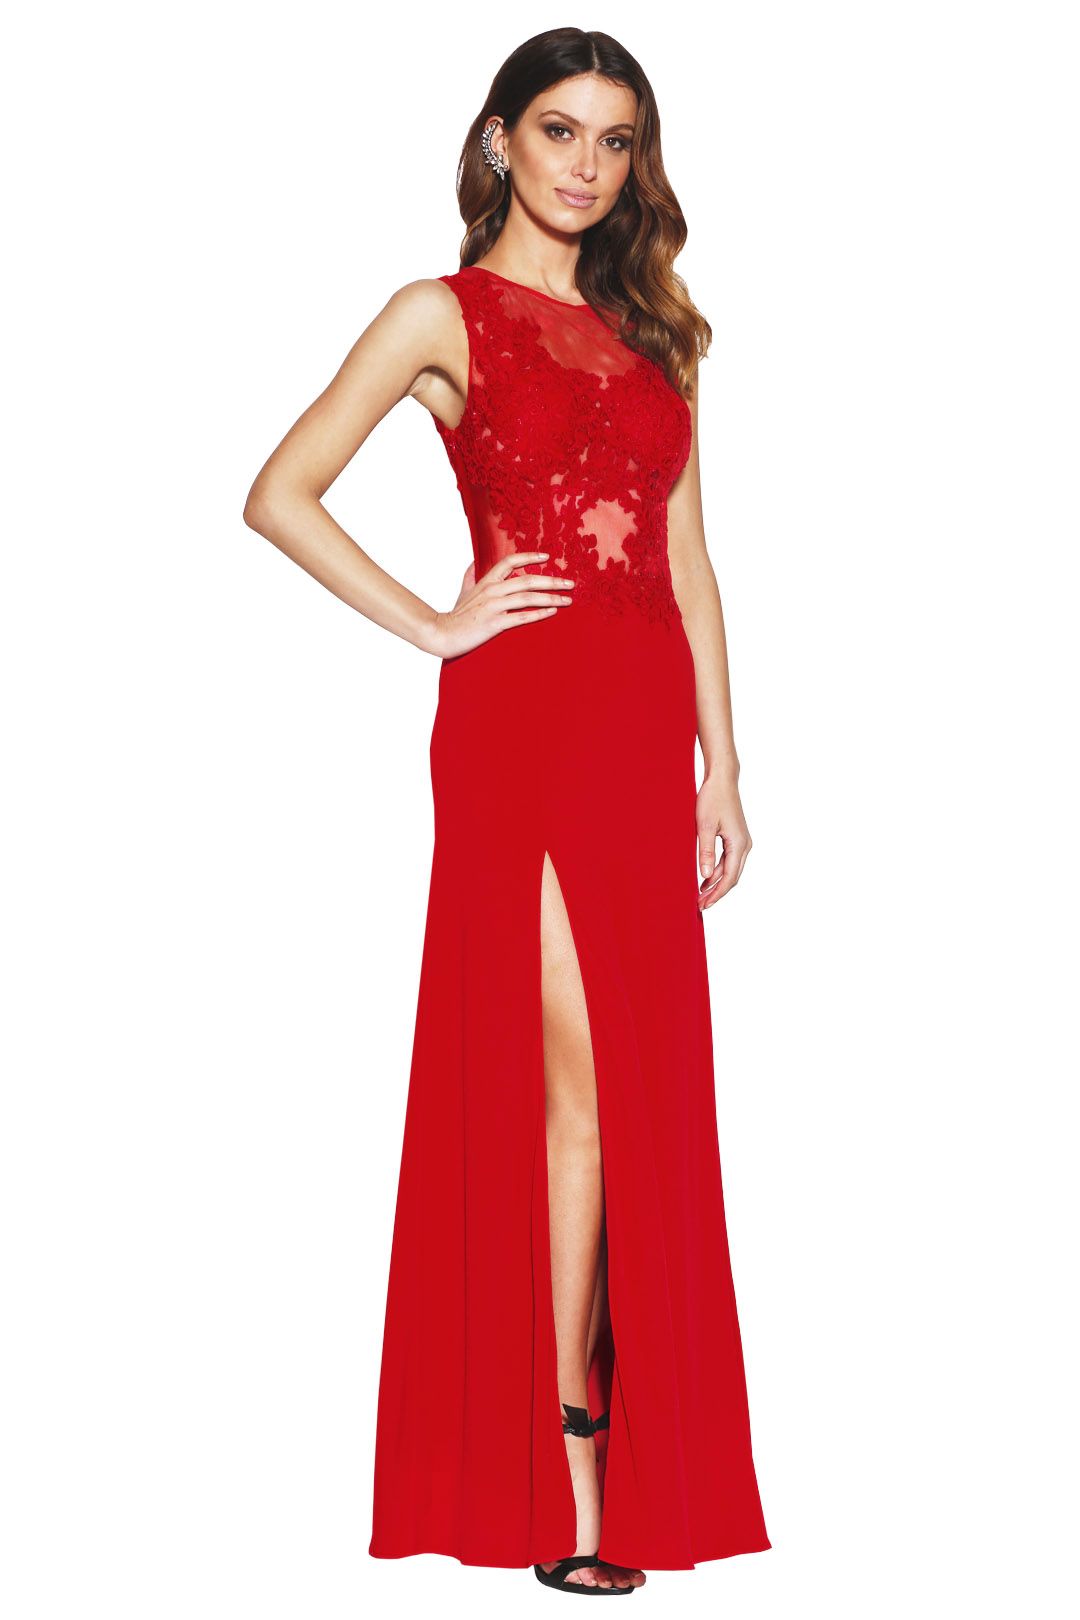 Grace and Hart - Starlet Gown Scarlet